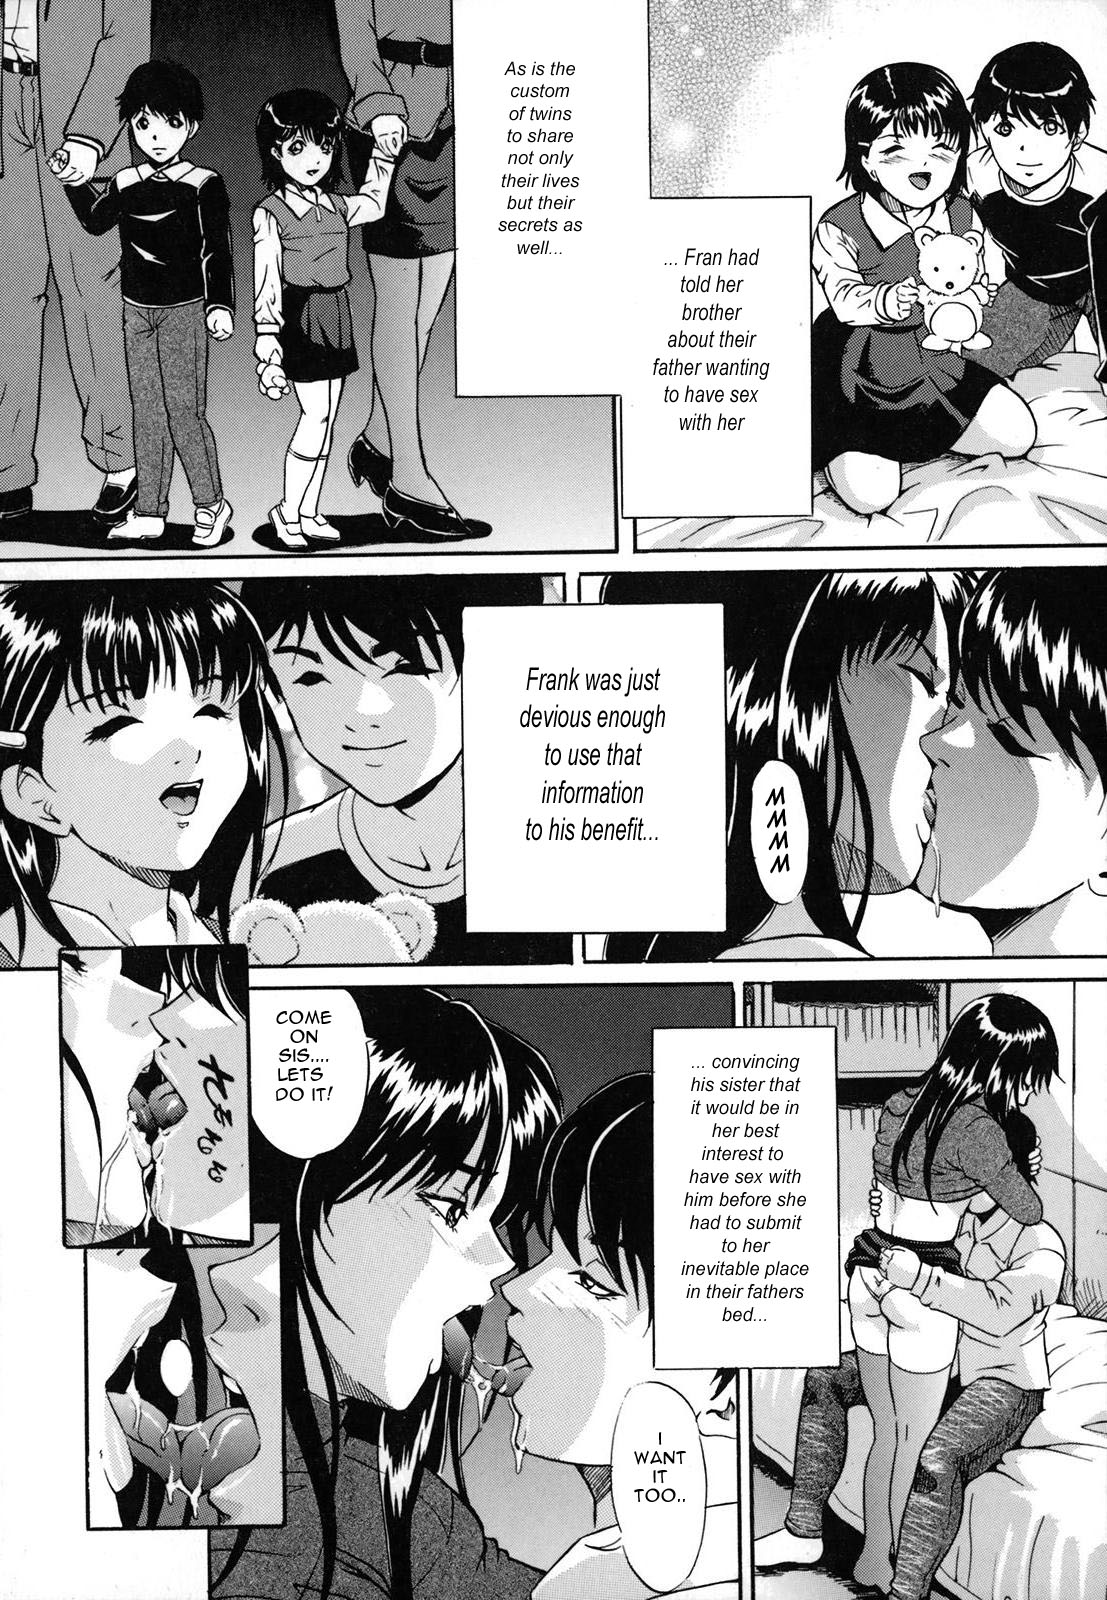 Family Practice [English] [Rewrite] [olddog51] page 3 full